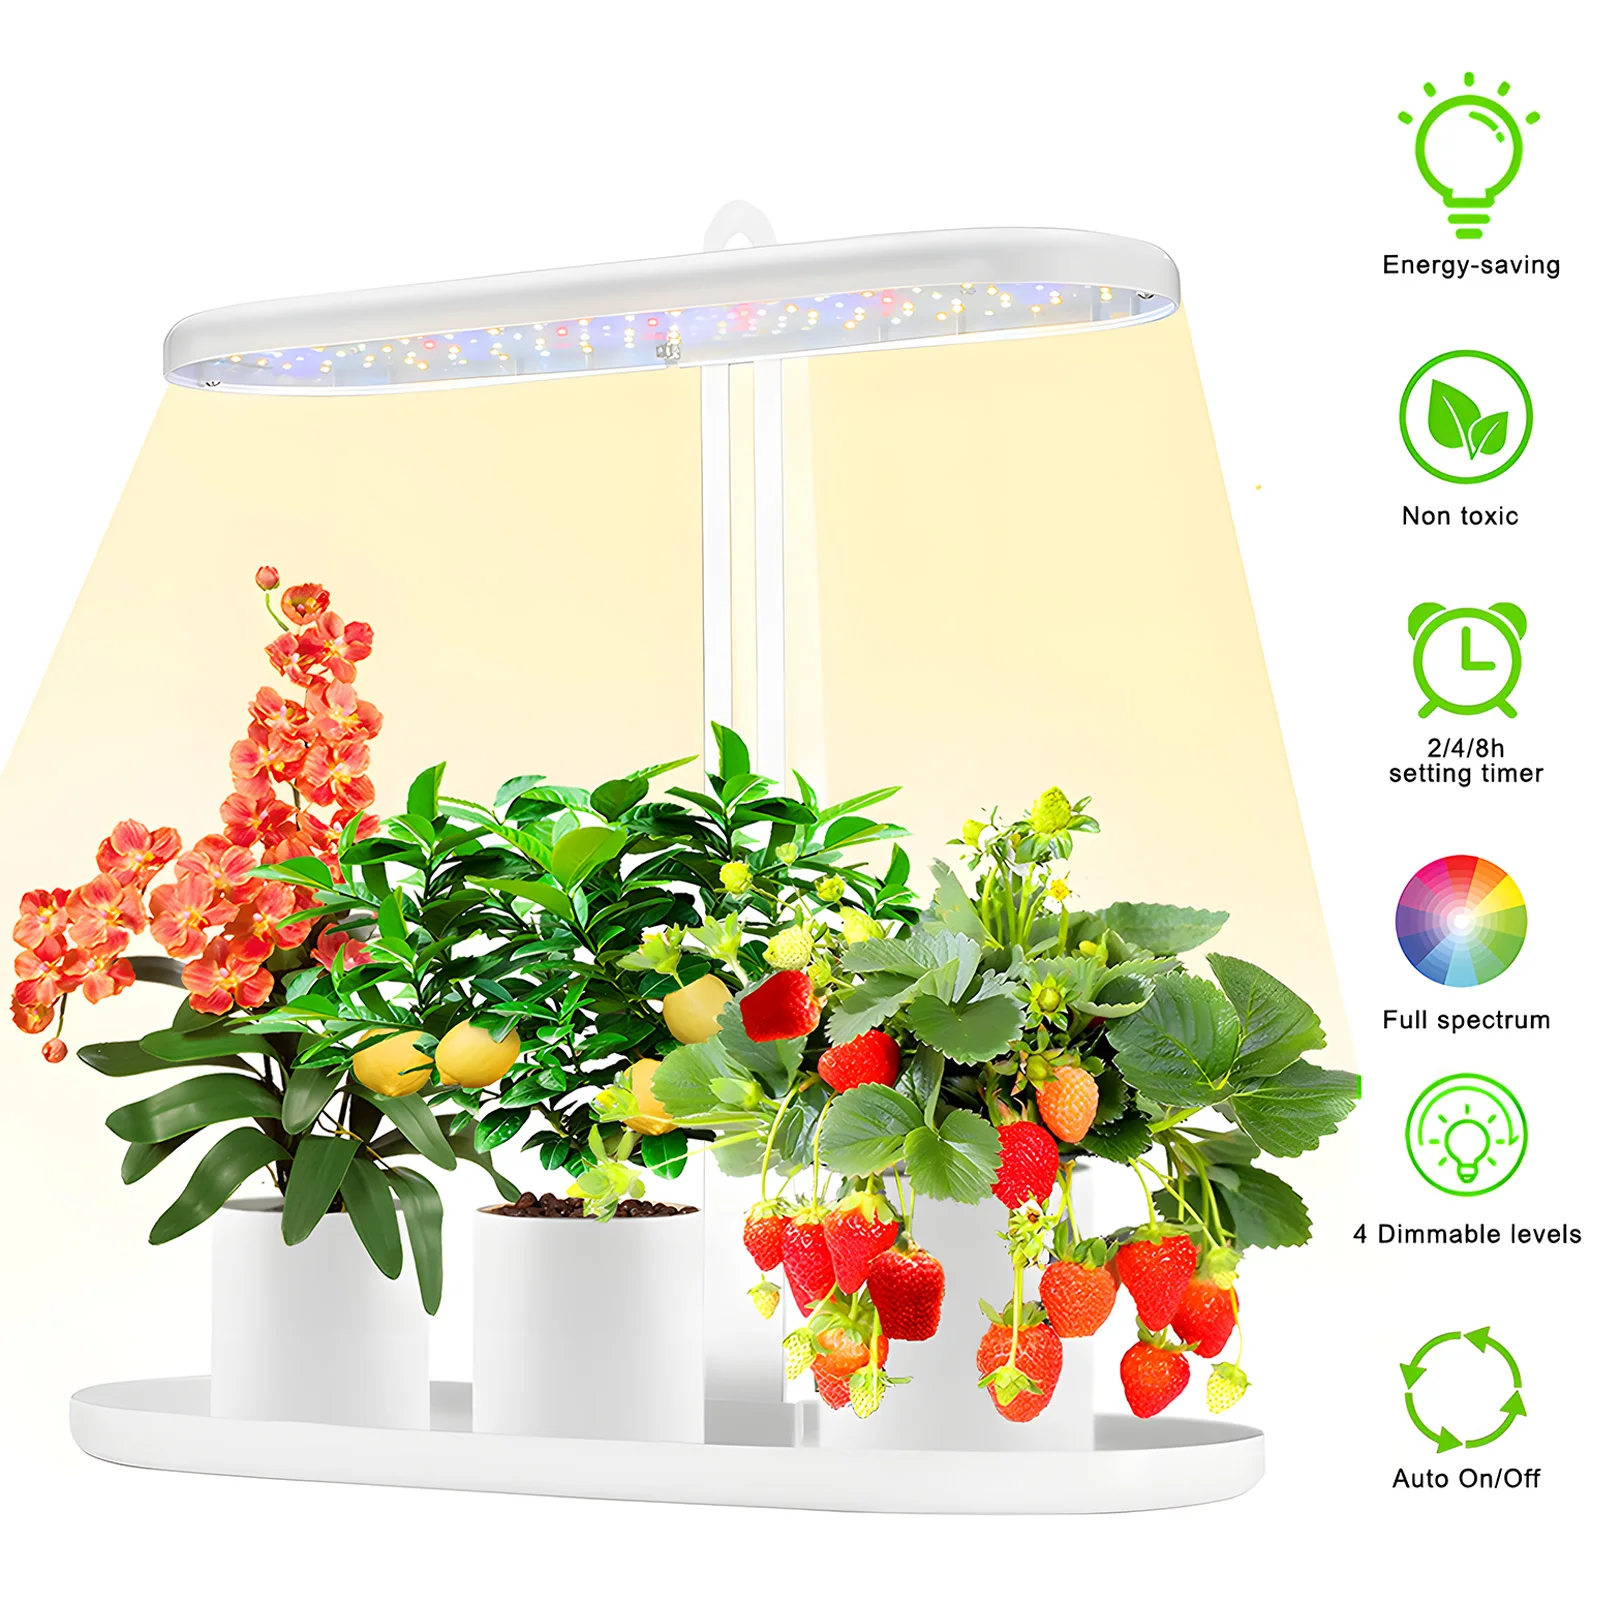 

10W LED Grow Light 2/4/8H Auto On/Off Timer 4-Level Dimmable Height Adjustable Full Spectrum Grow Light Ideal for Plant Lighting